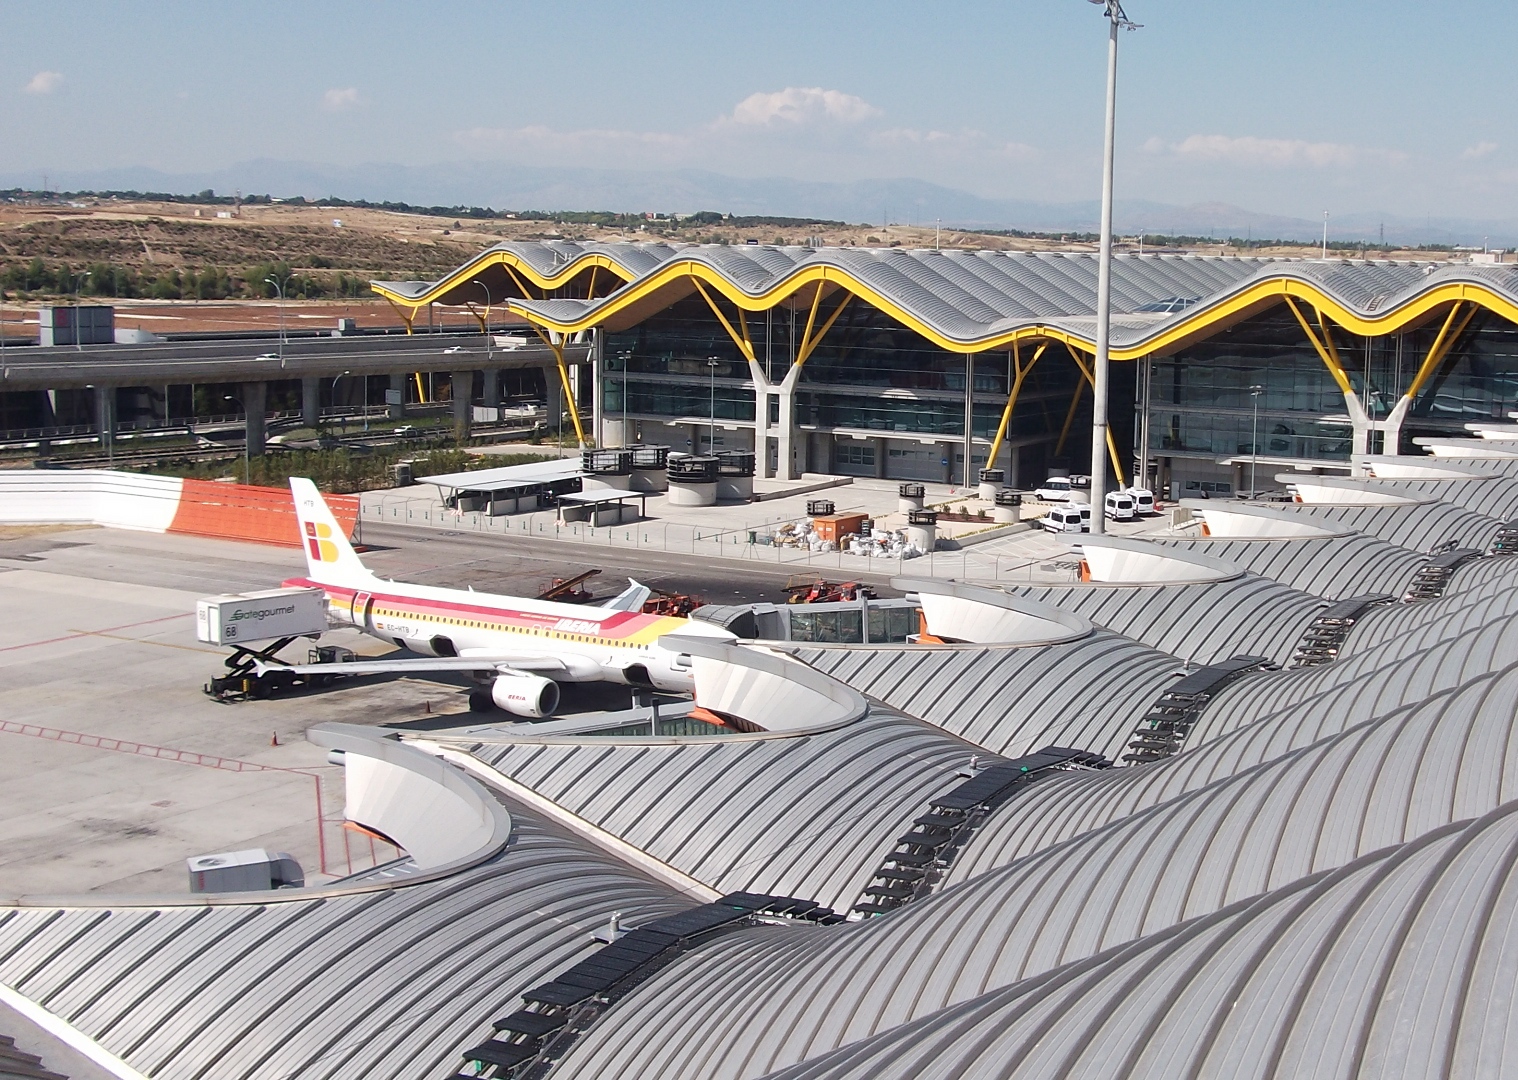 ROOF SAFETY IS KEE AT SPANISH AIRPORT